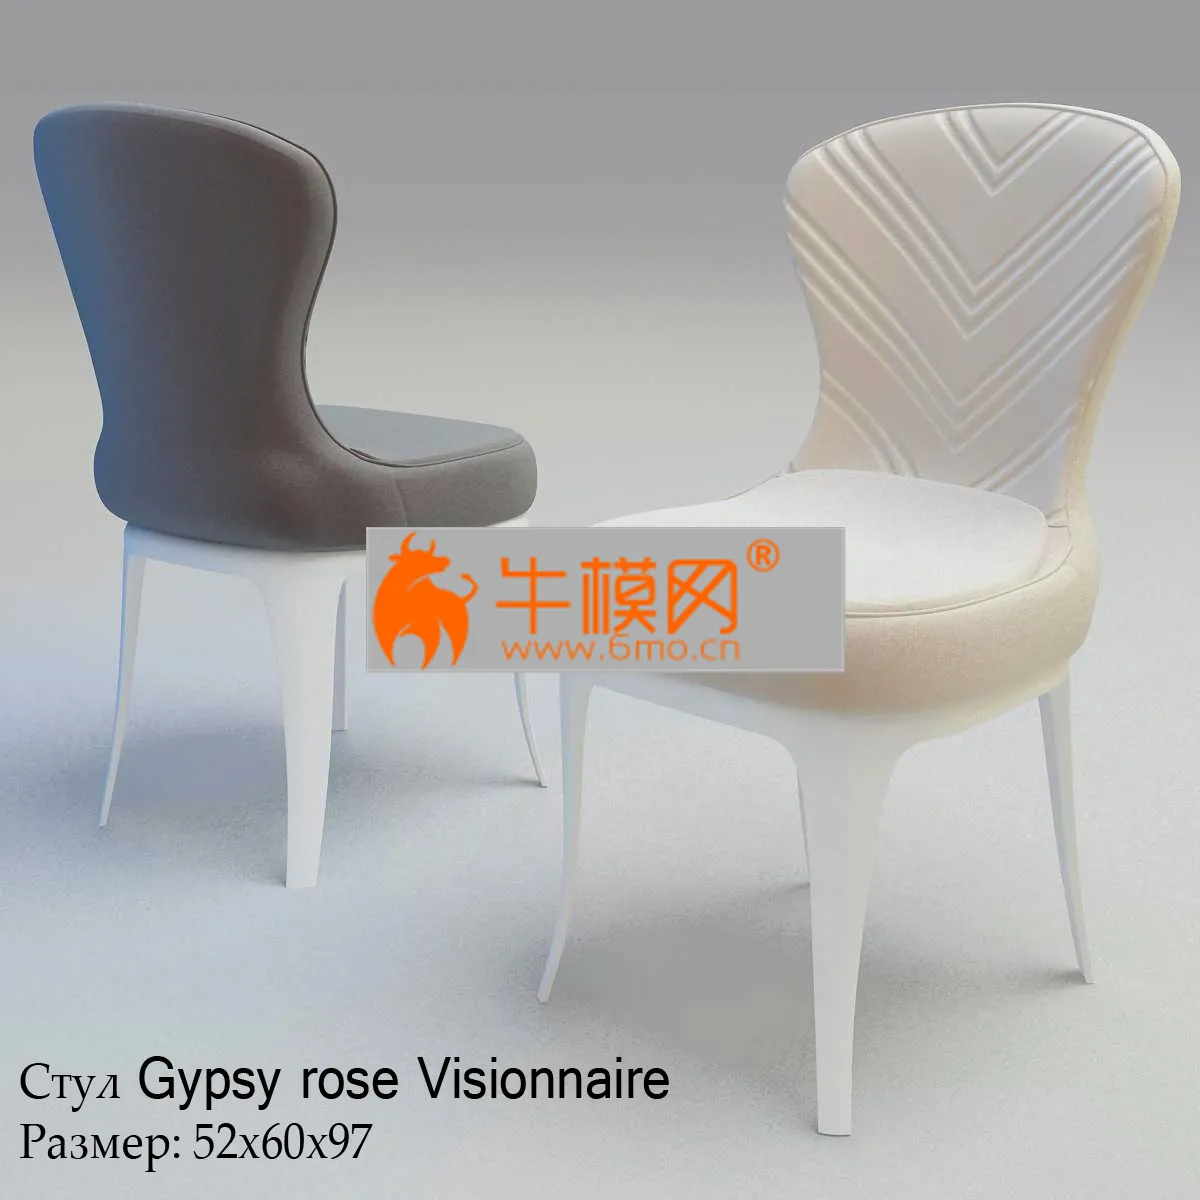 Chair Gypsy Rose Ipe Cavalli Visionnaire – 3991